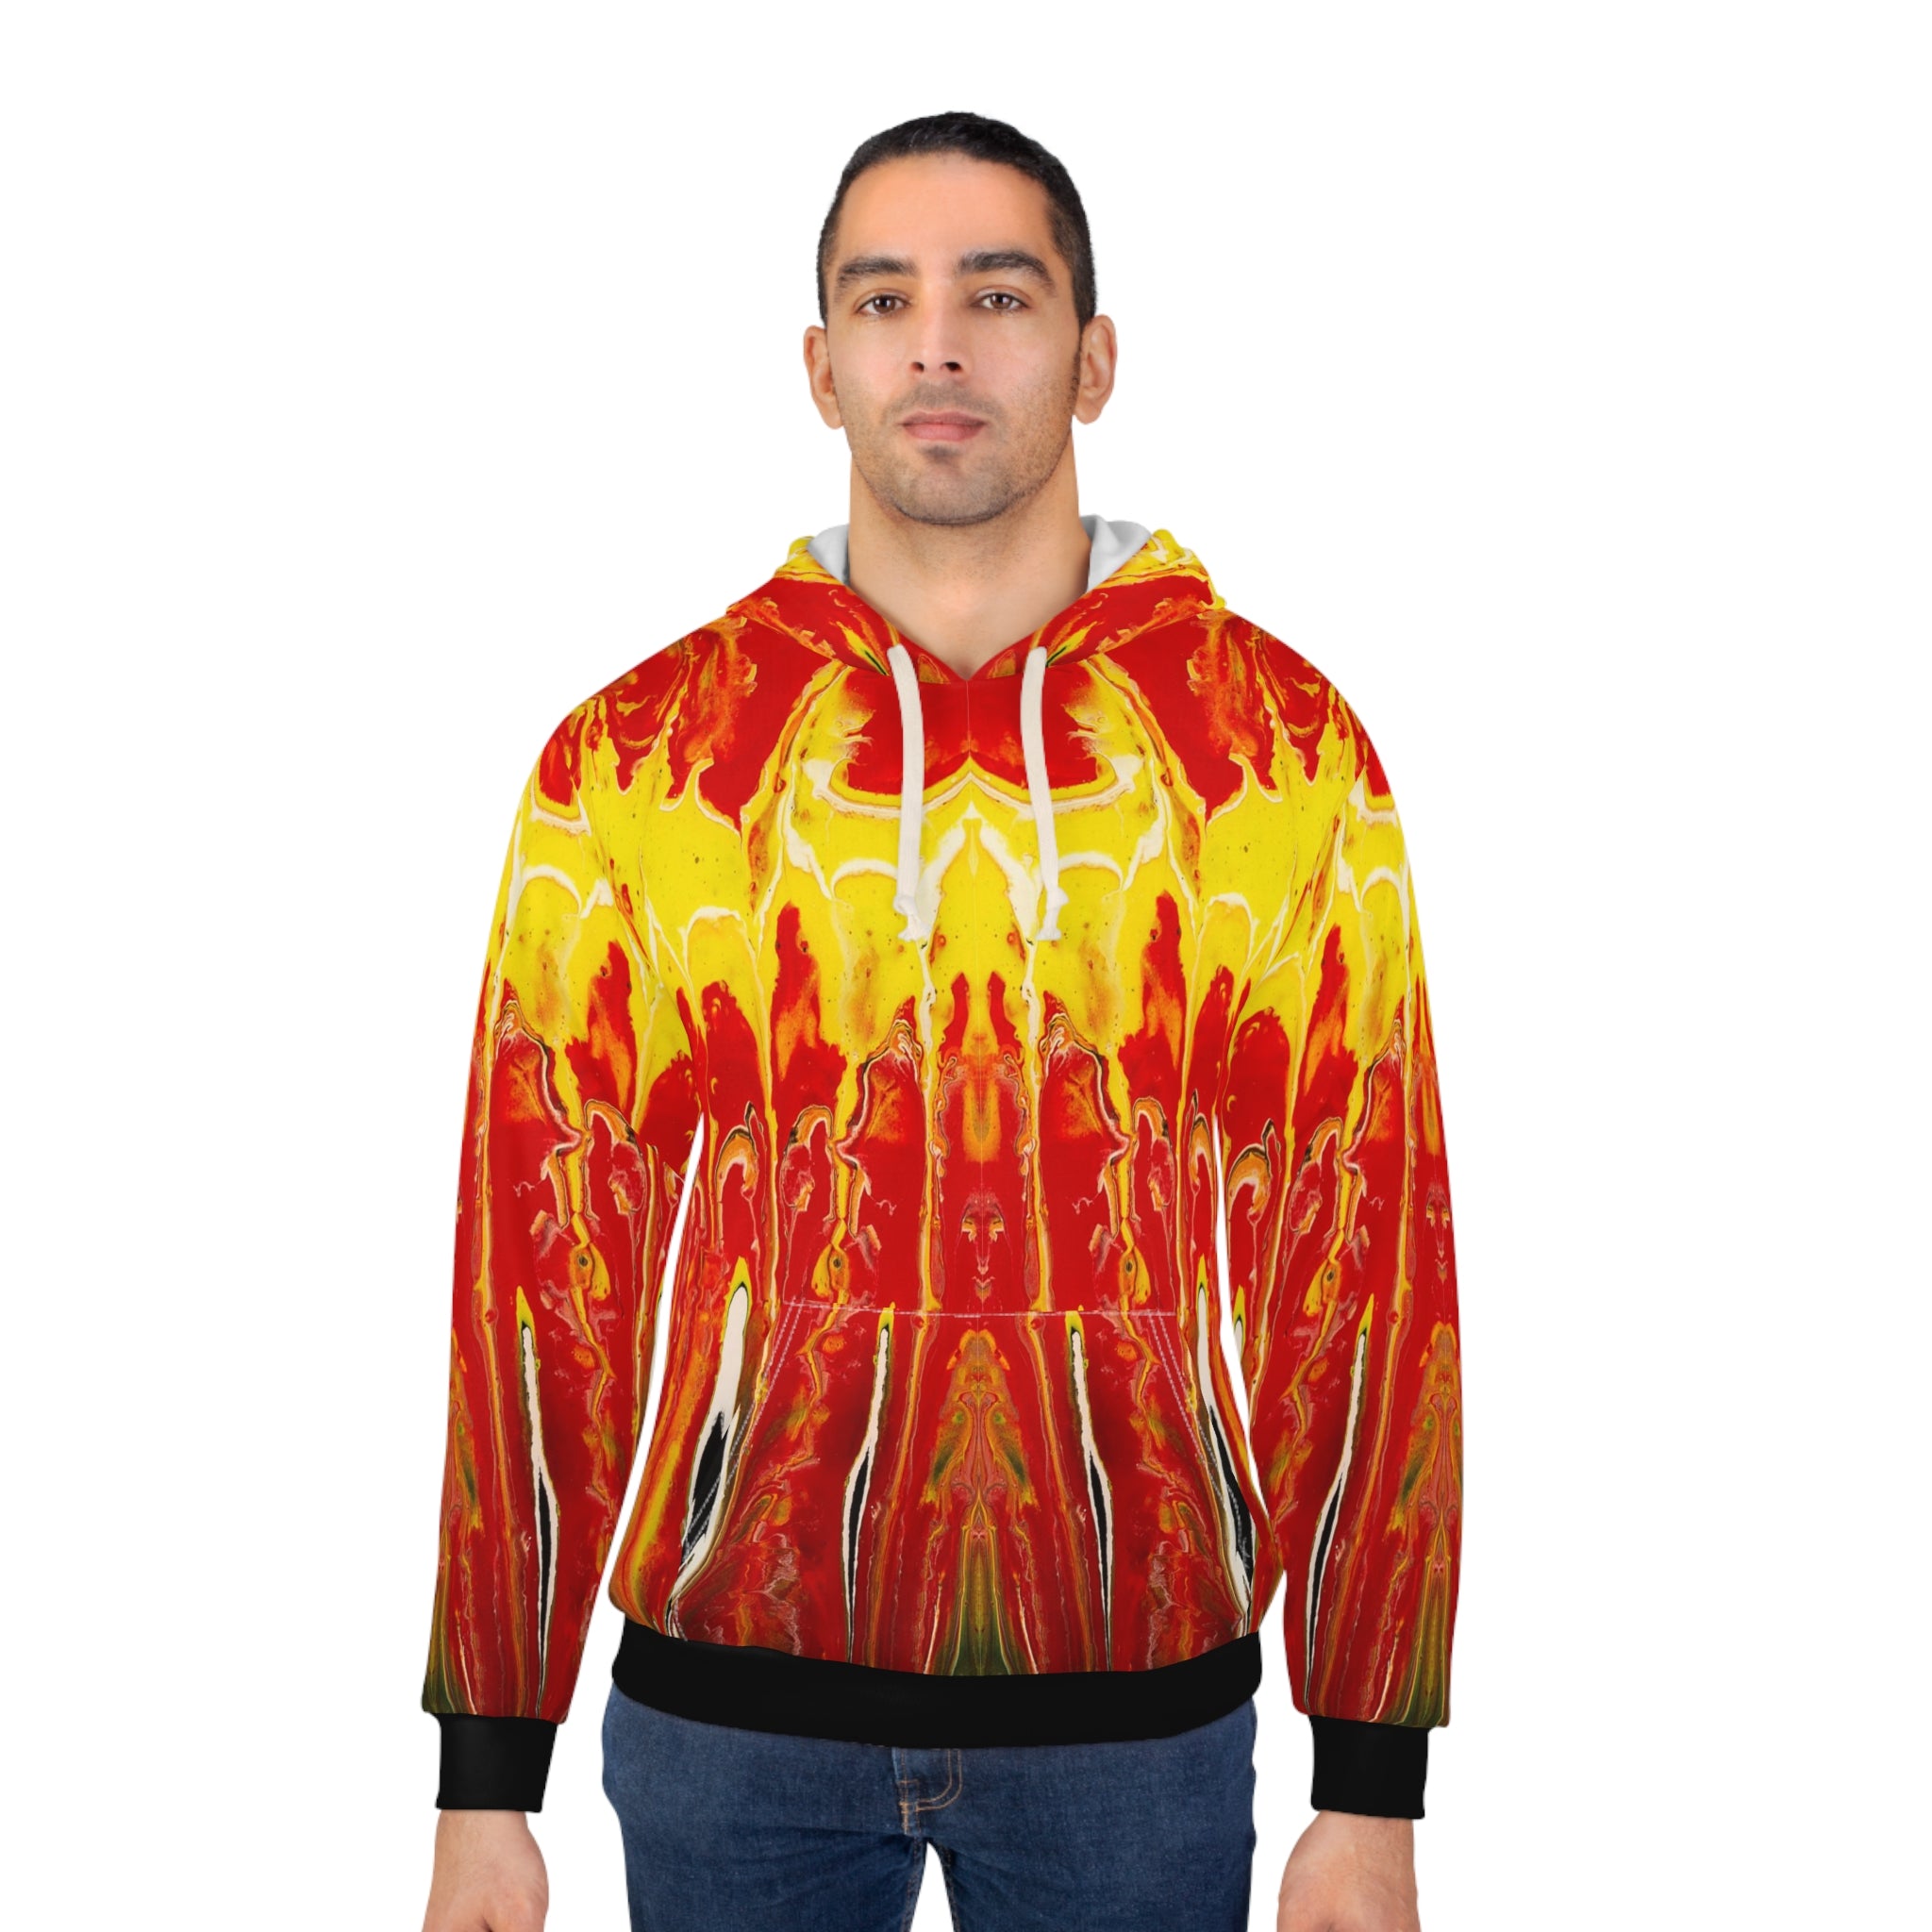 Cameron Creations - Internal Flames - Pullover Hoodie - Male